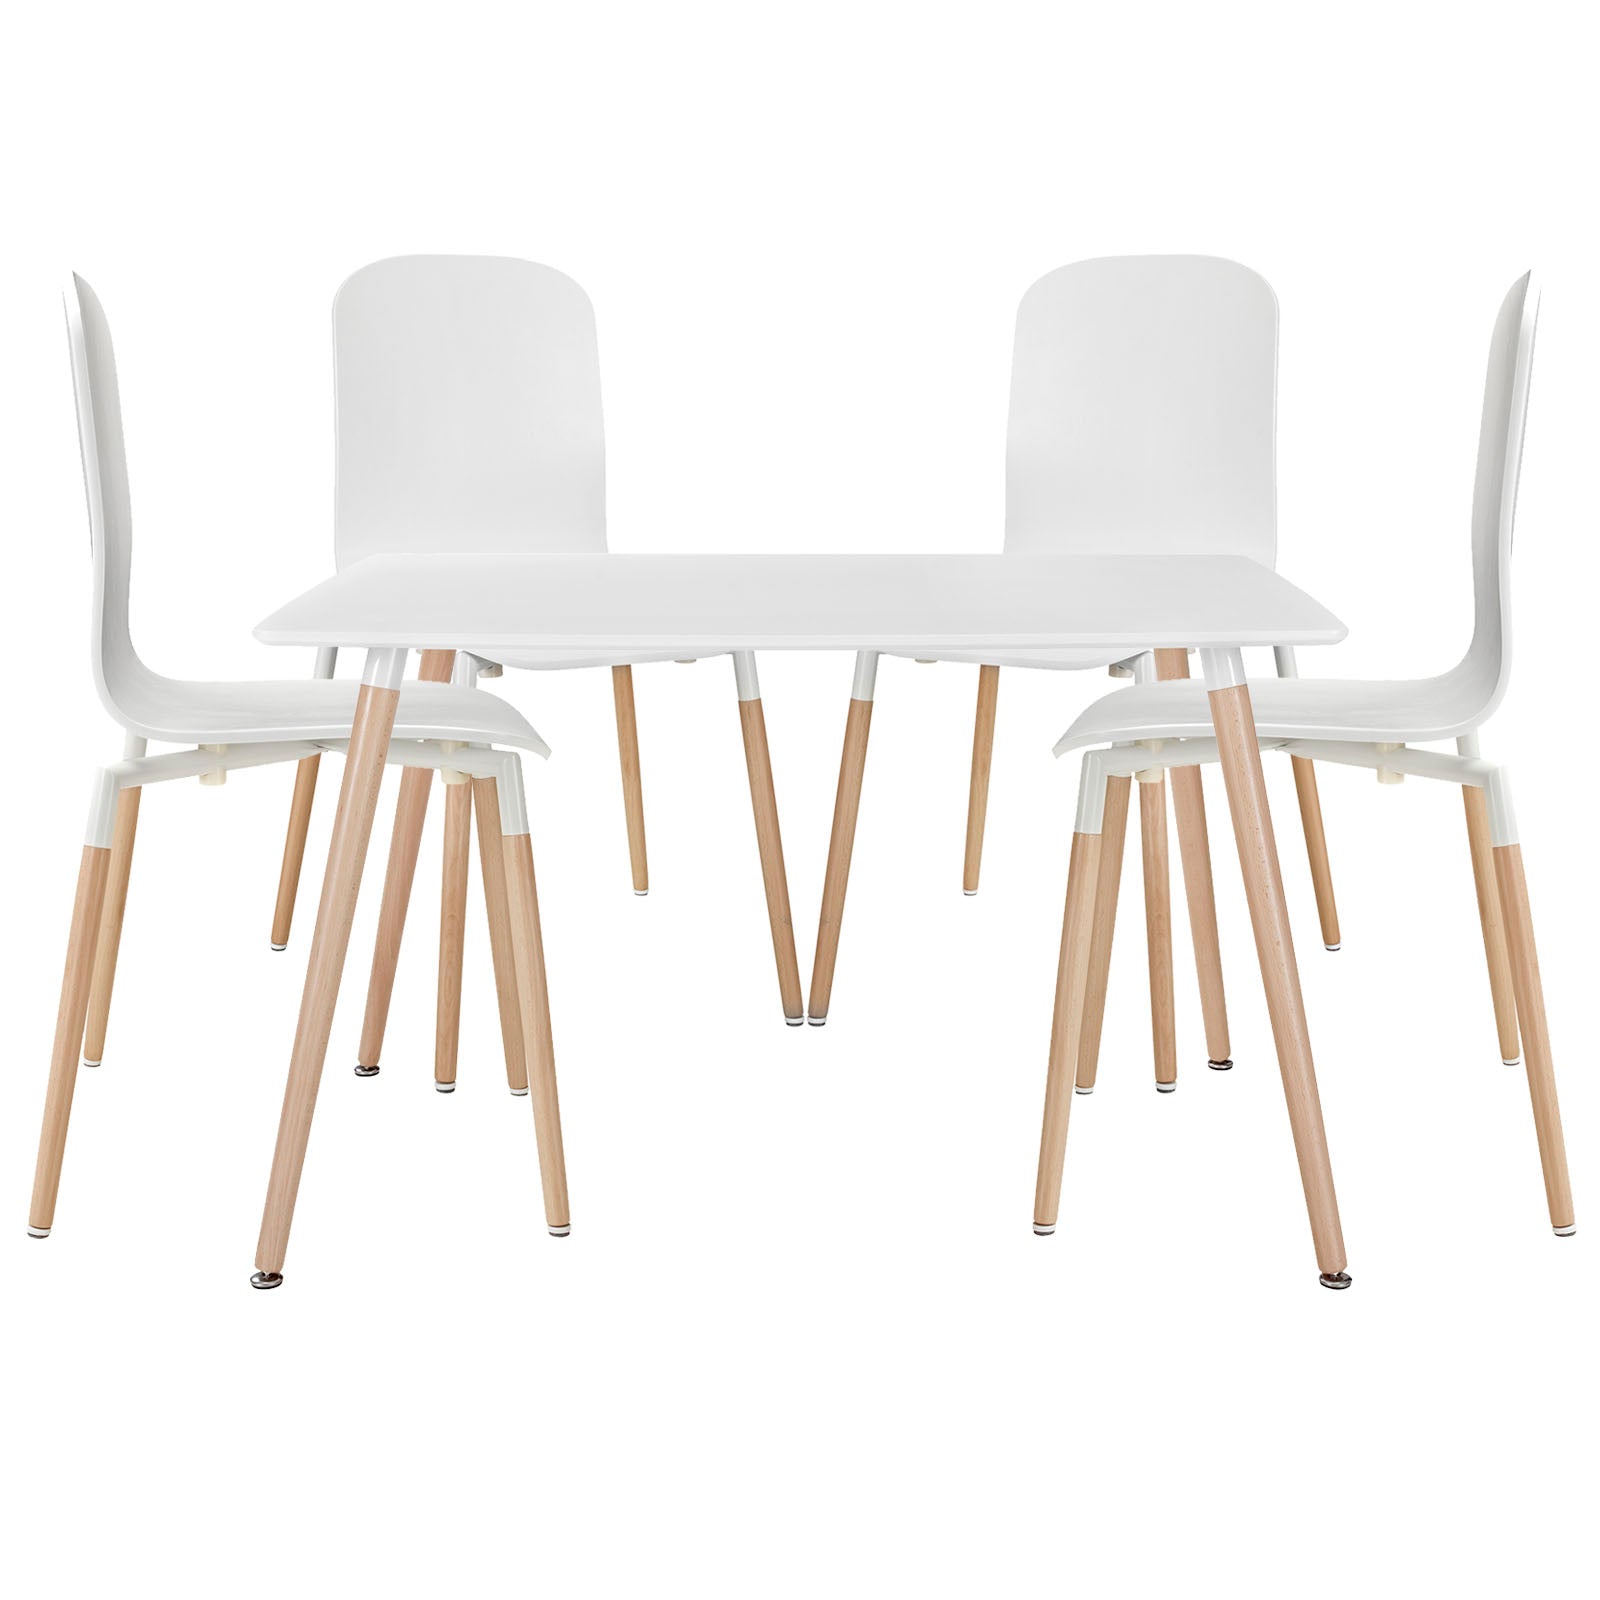 Stack Dining Chairs and Table Wood Set of 5 - East Shore Modern Home Furnishings